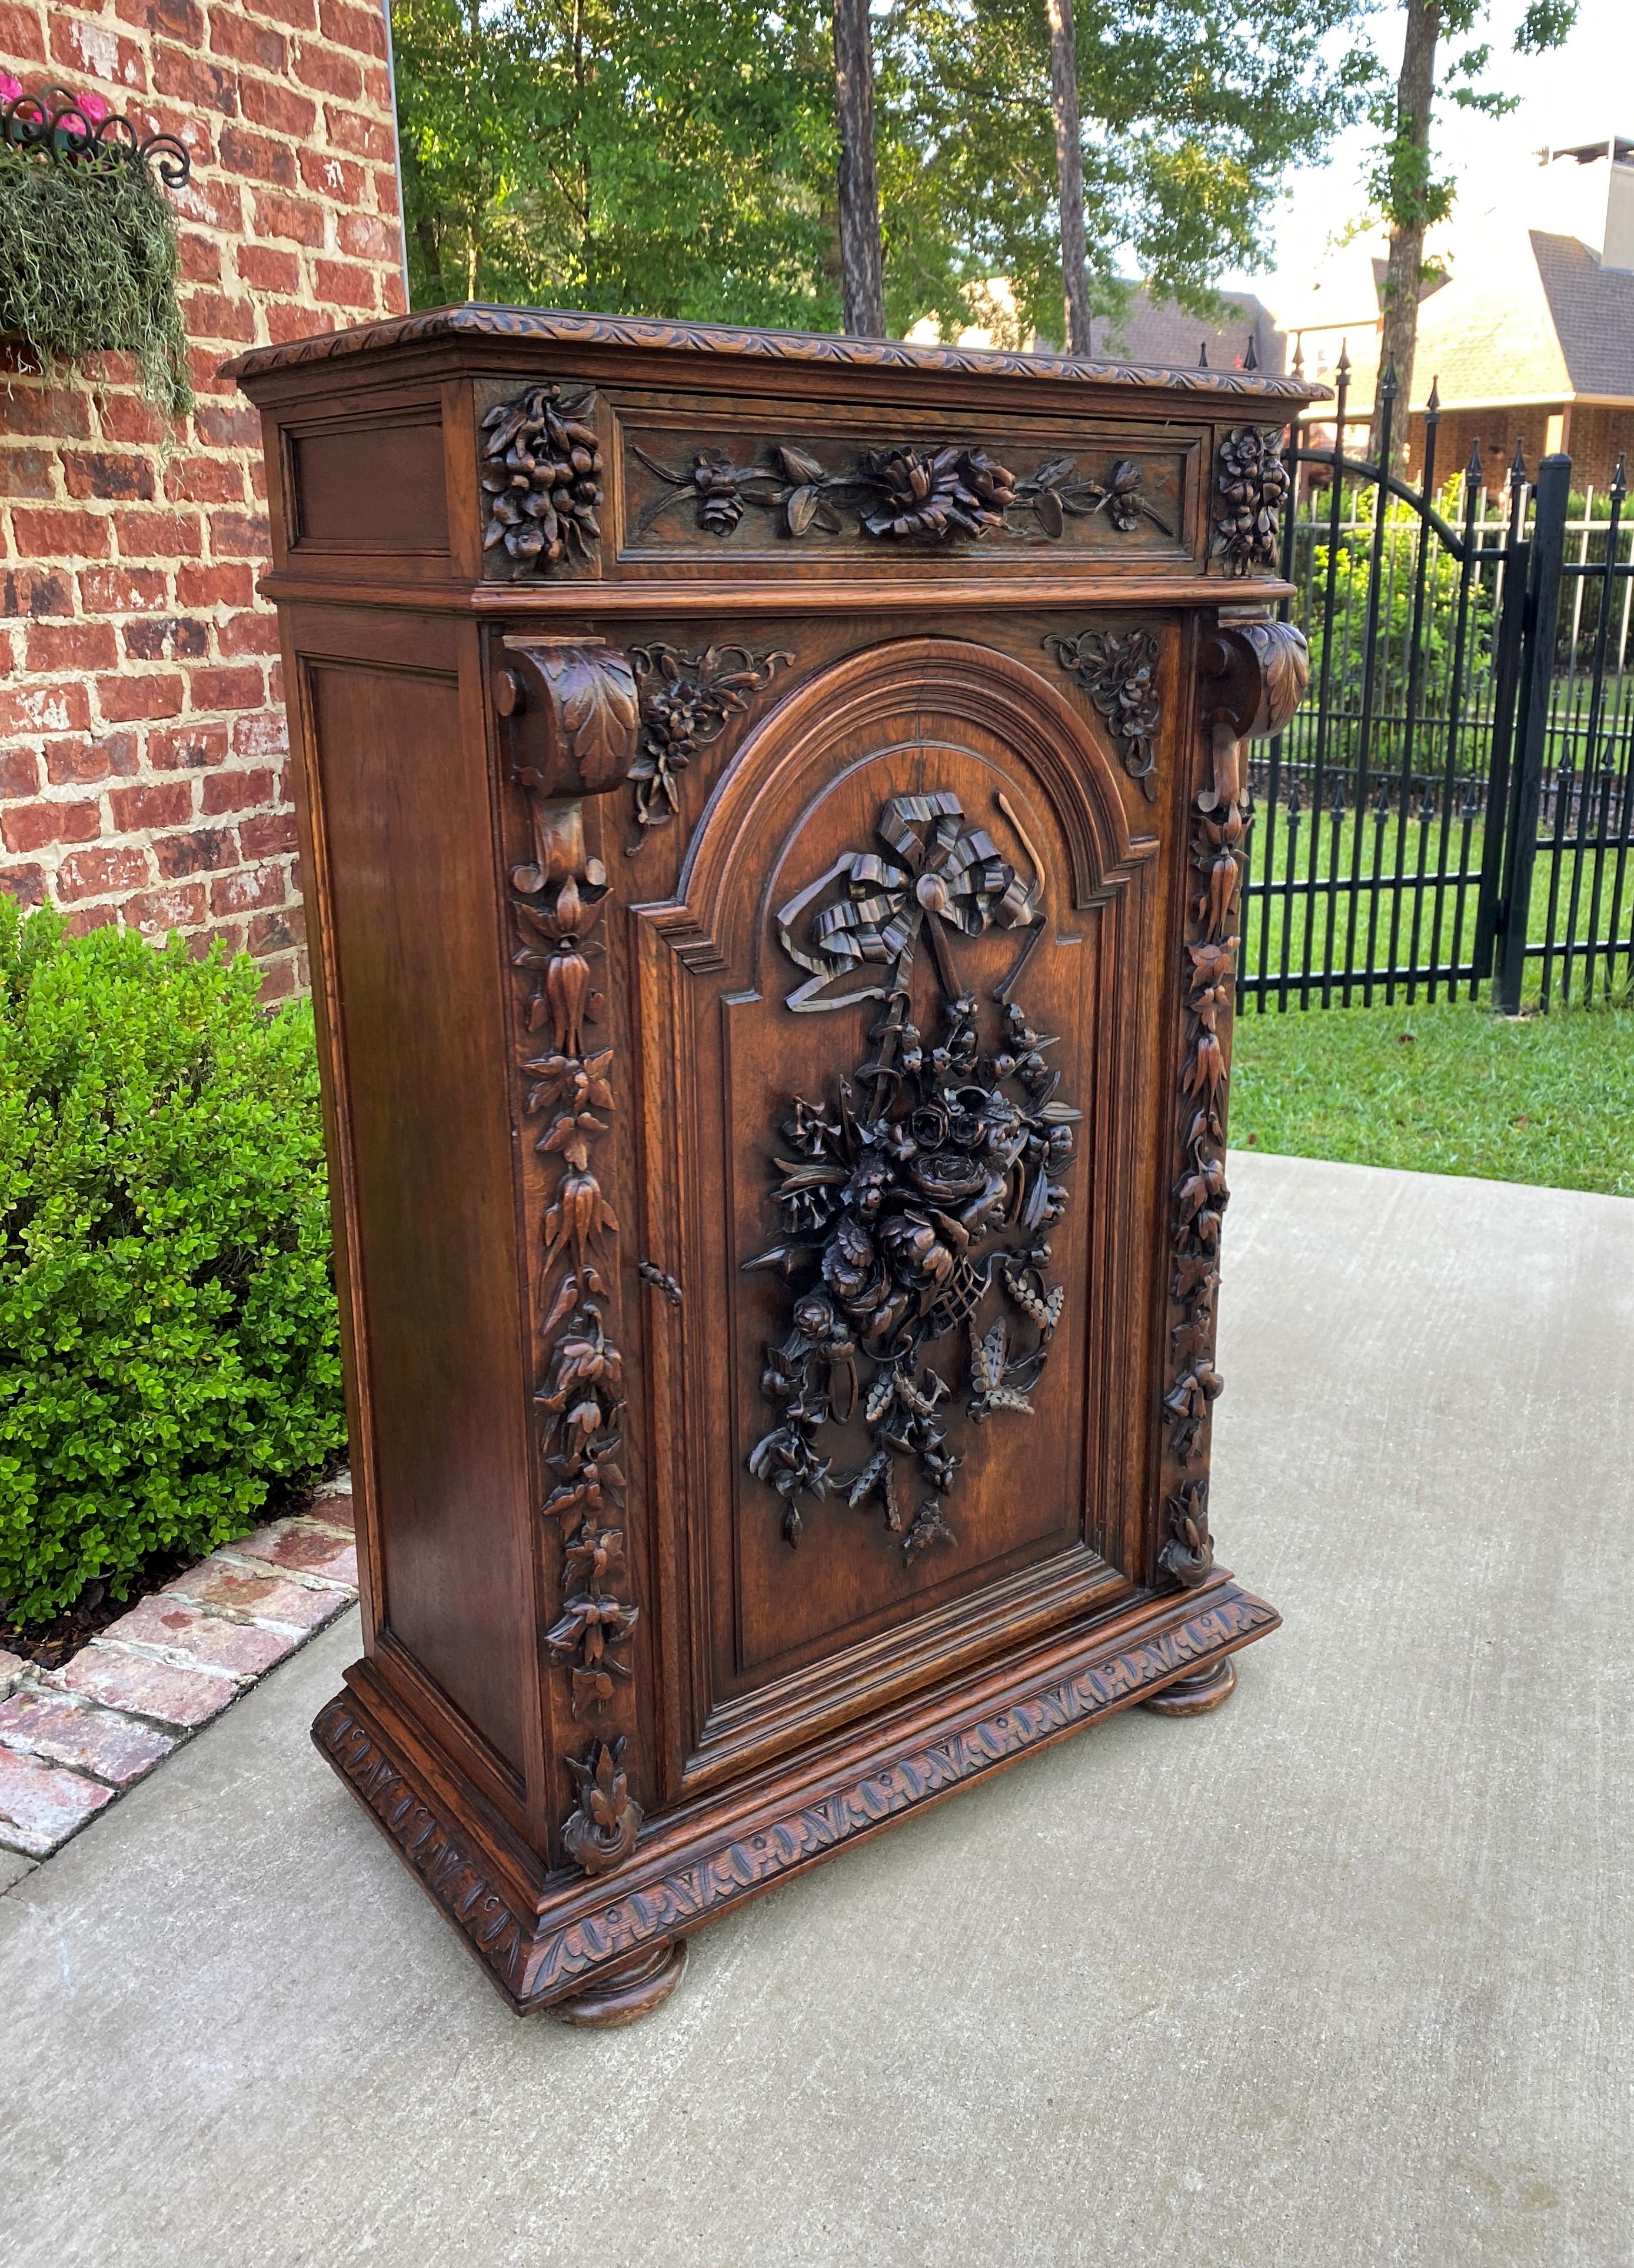 Outstanding highly carved Antique French oak Renaissance revival cabinet chest with drawer~~c. 1880s.

Perfect statement piece that can accommodate any number of storage needs in today's home~~use in a bedroom or dressing area for clothing or